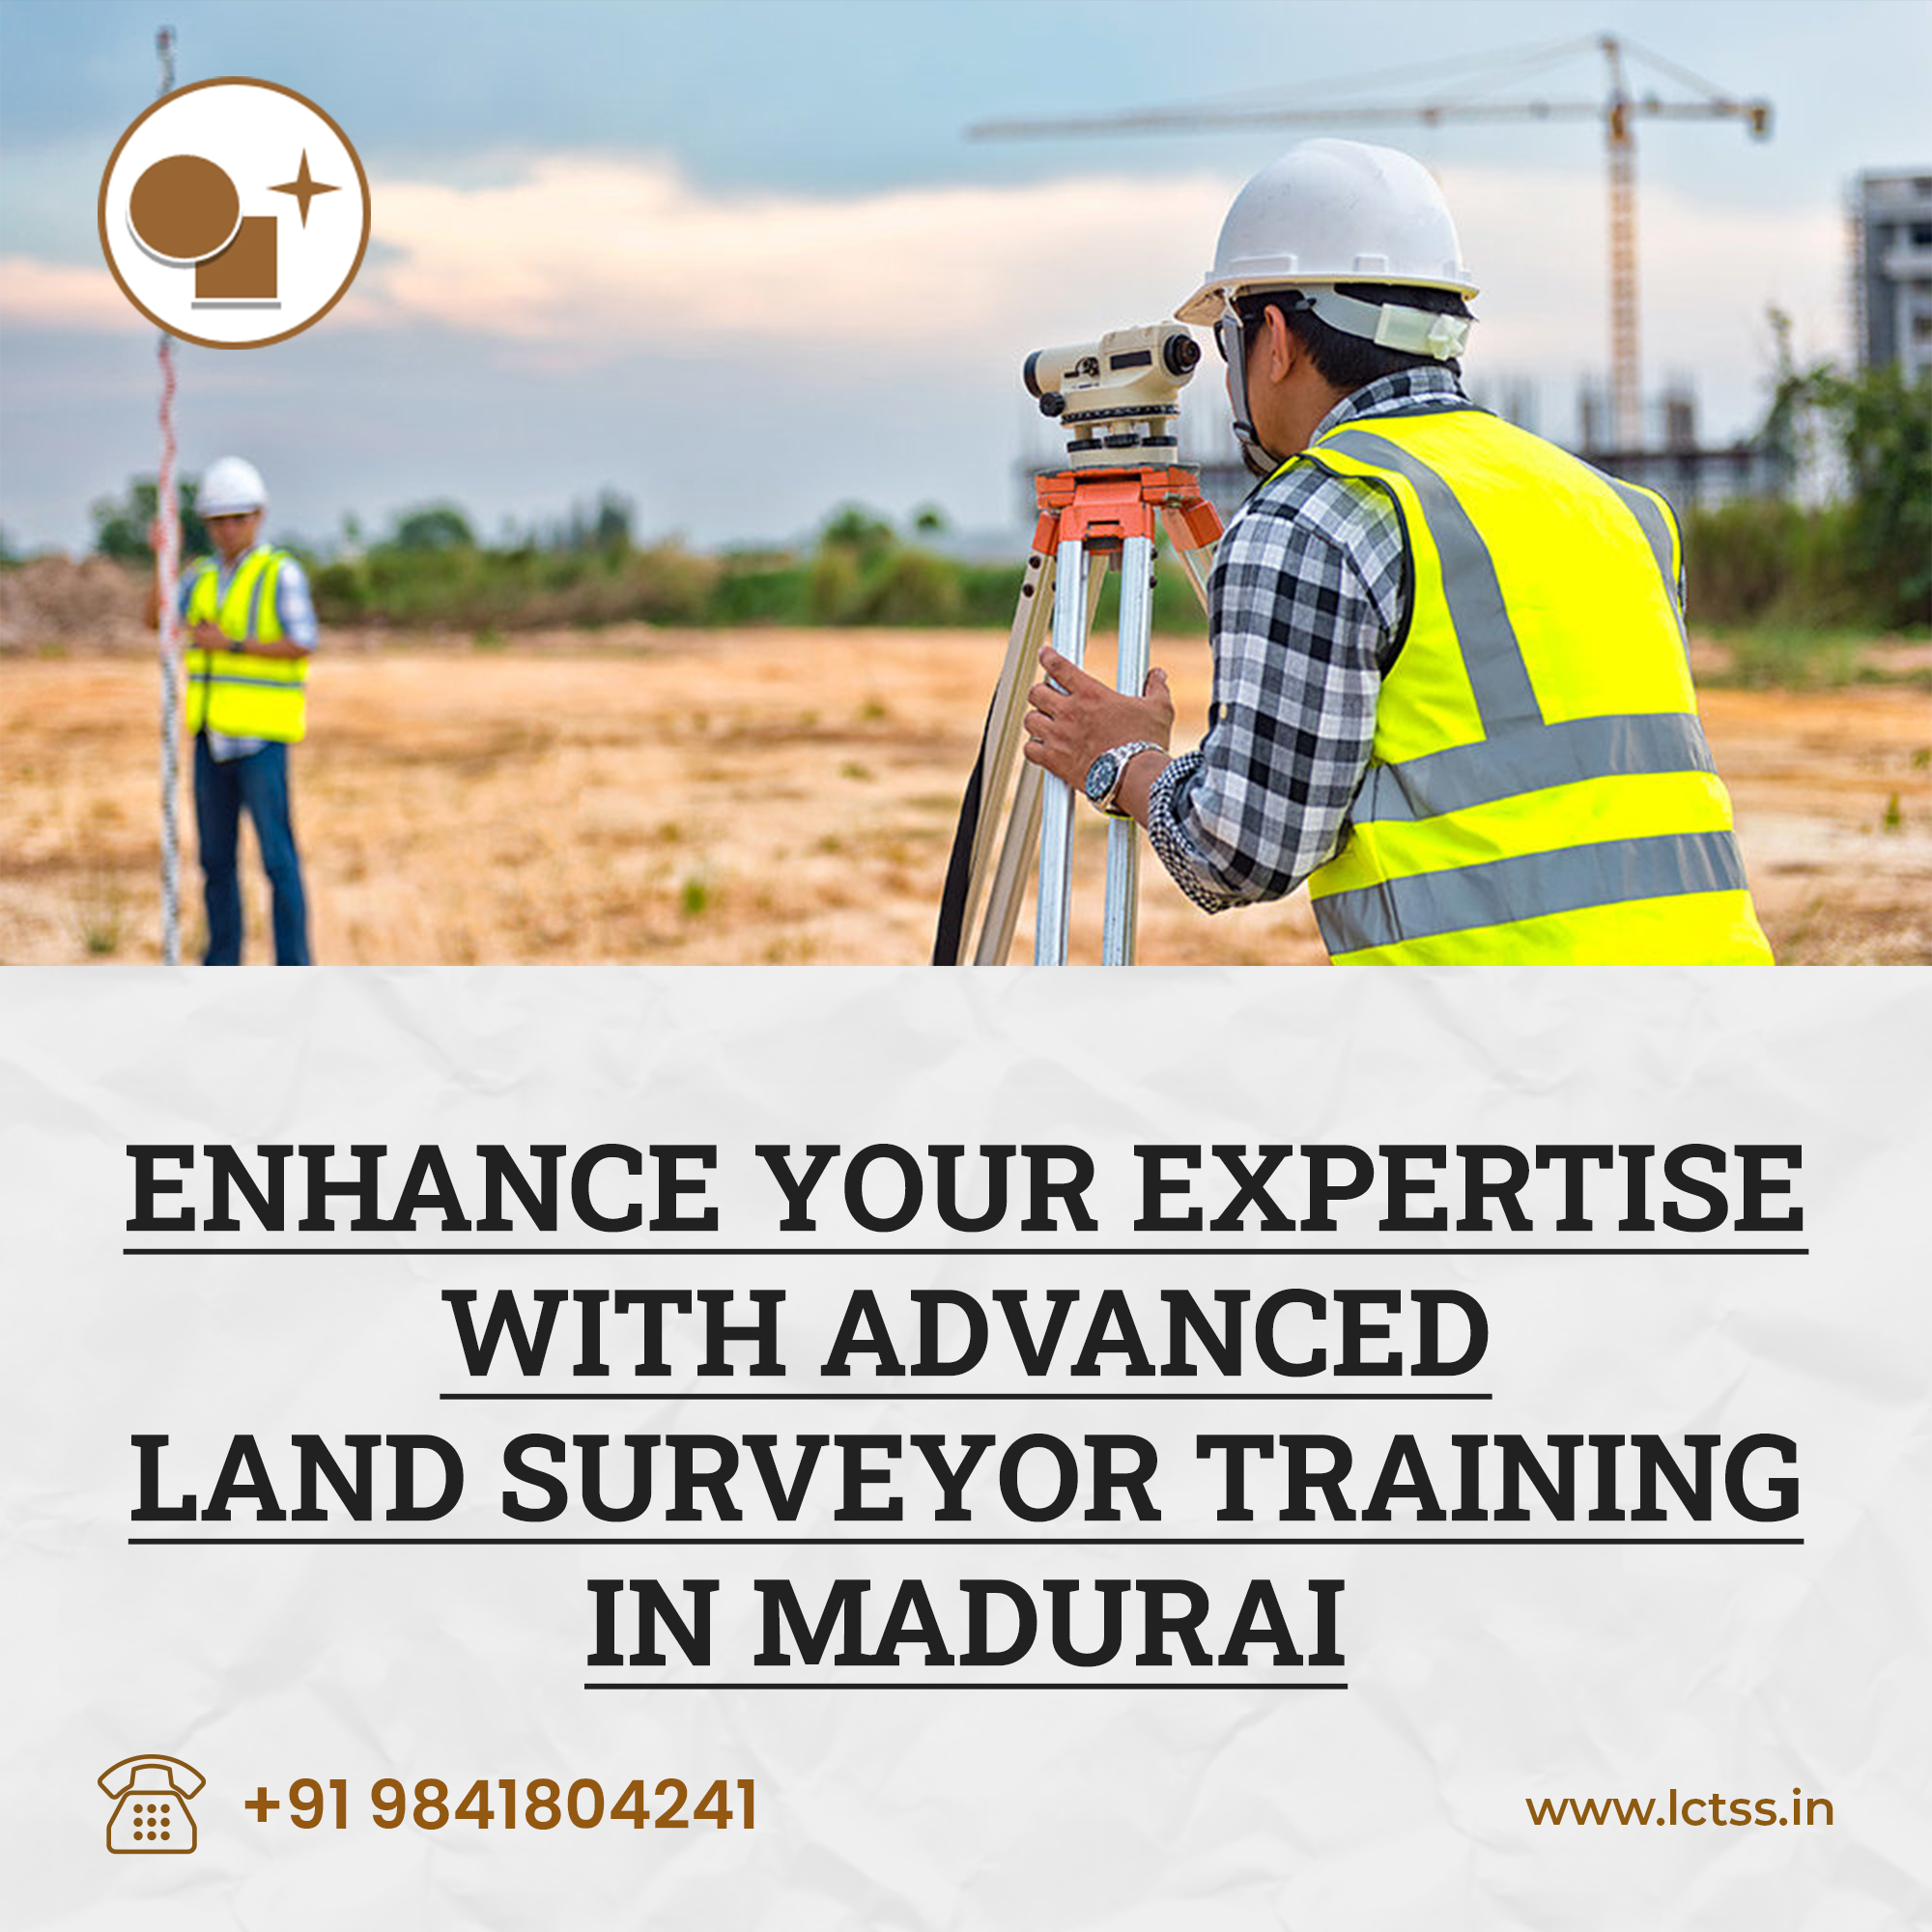 Enhance Your Expertise with Advanced Land Surveyor Training in Madurai